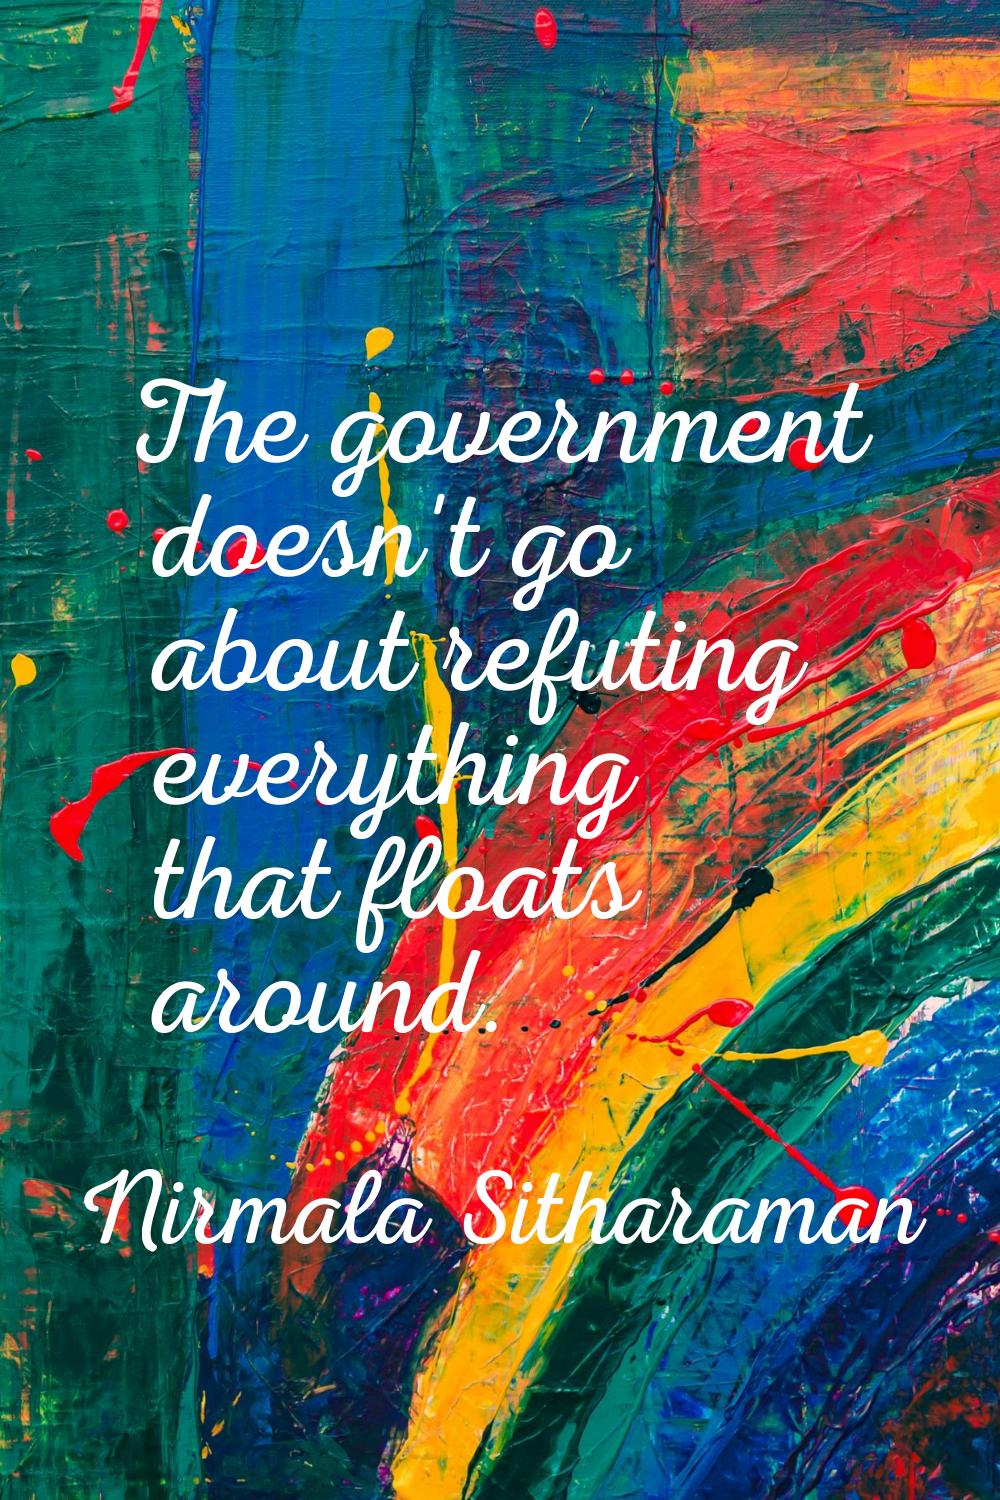 The government doesn't go about refuting everything that floats around.